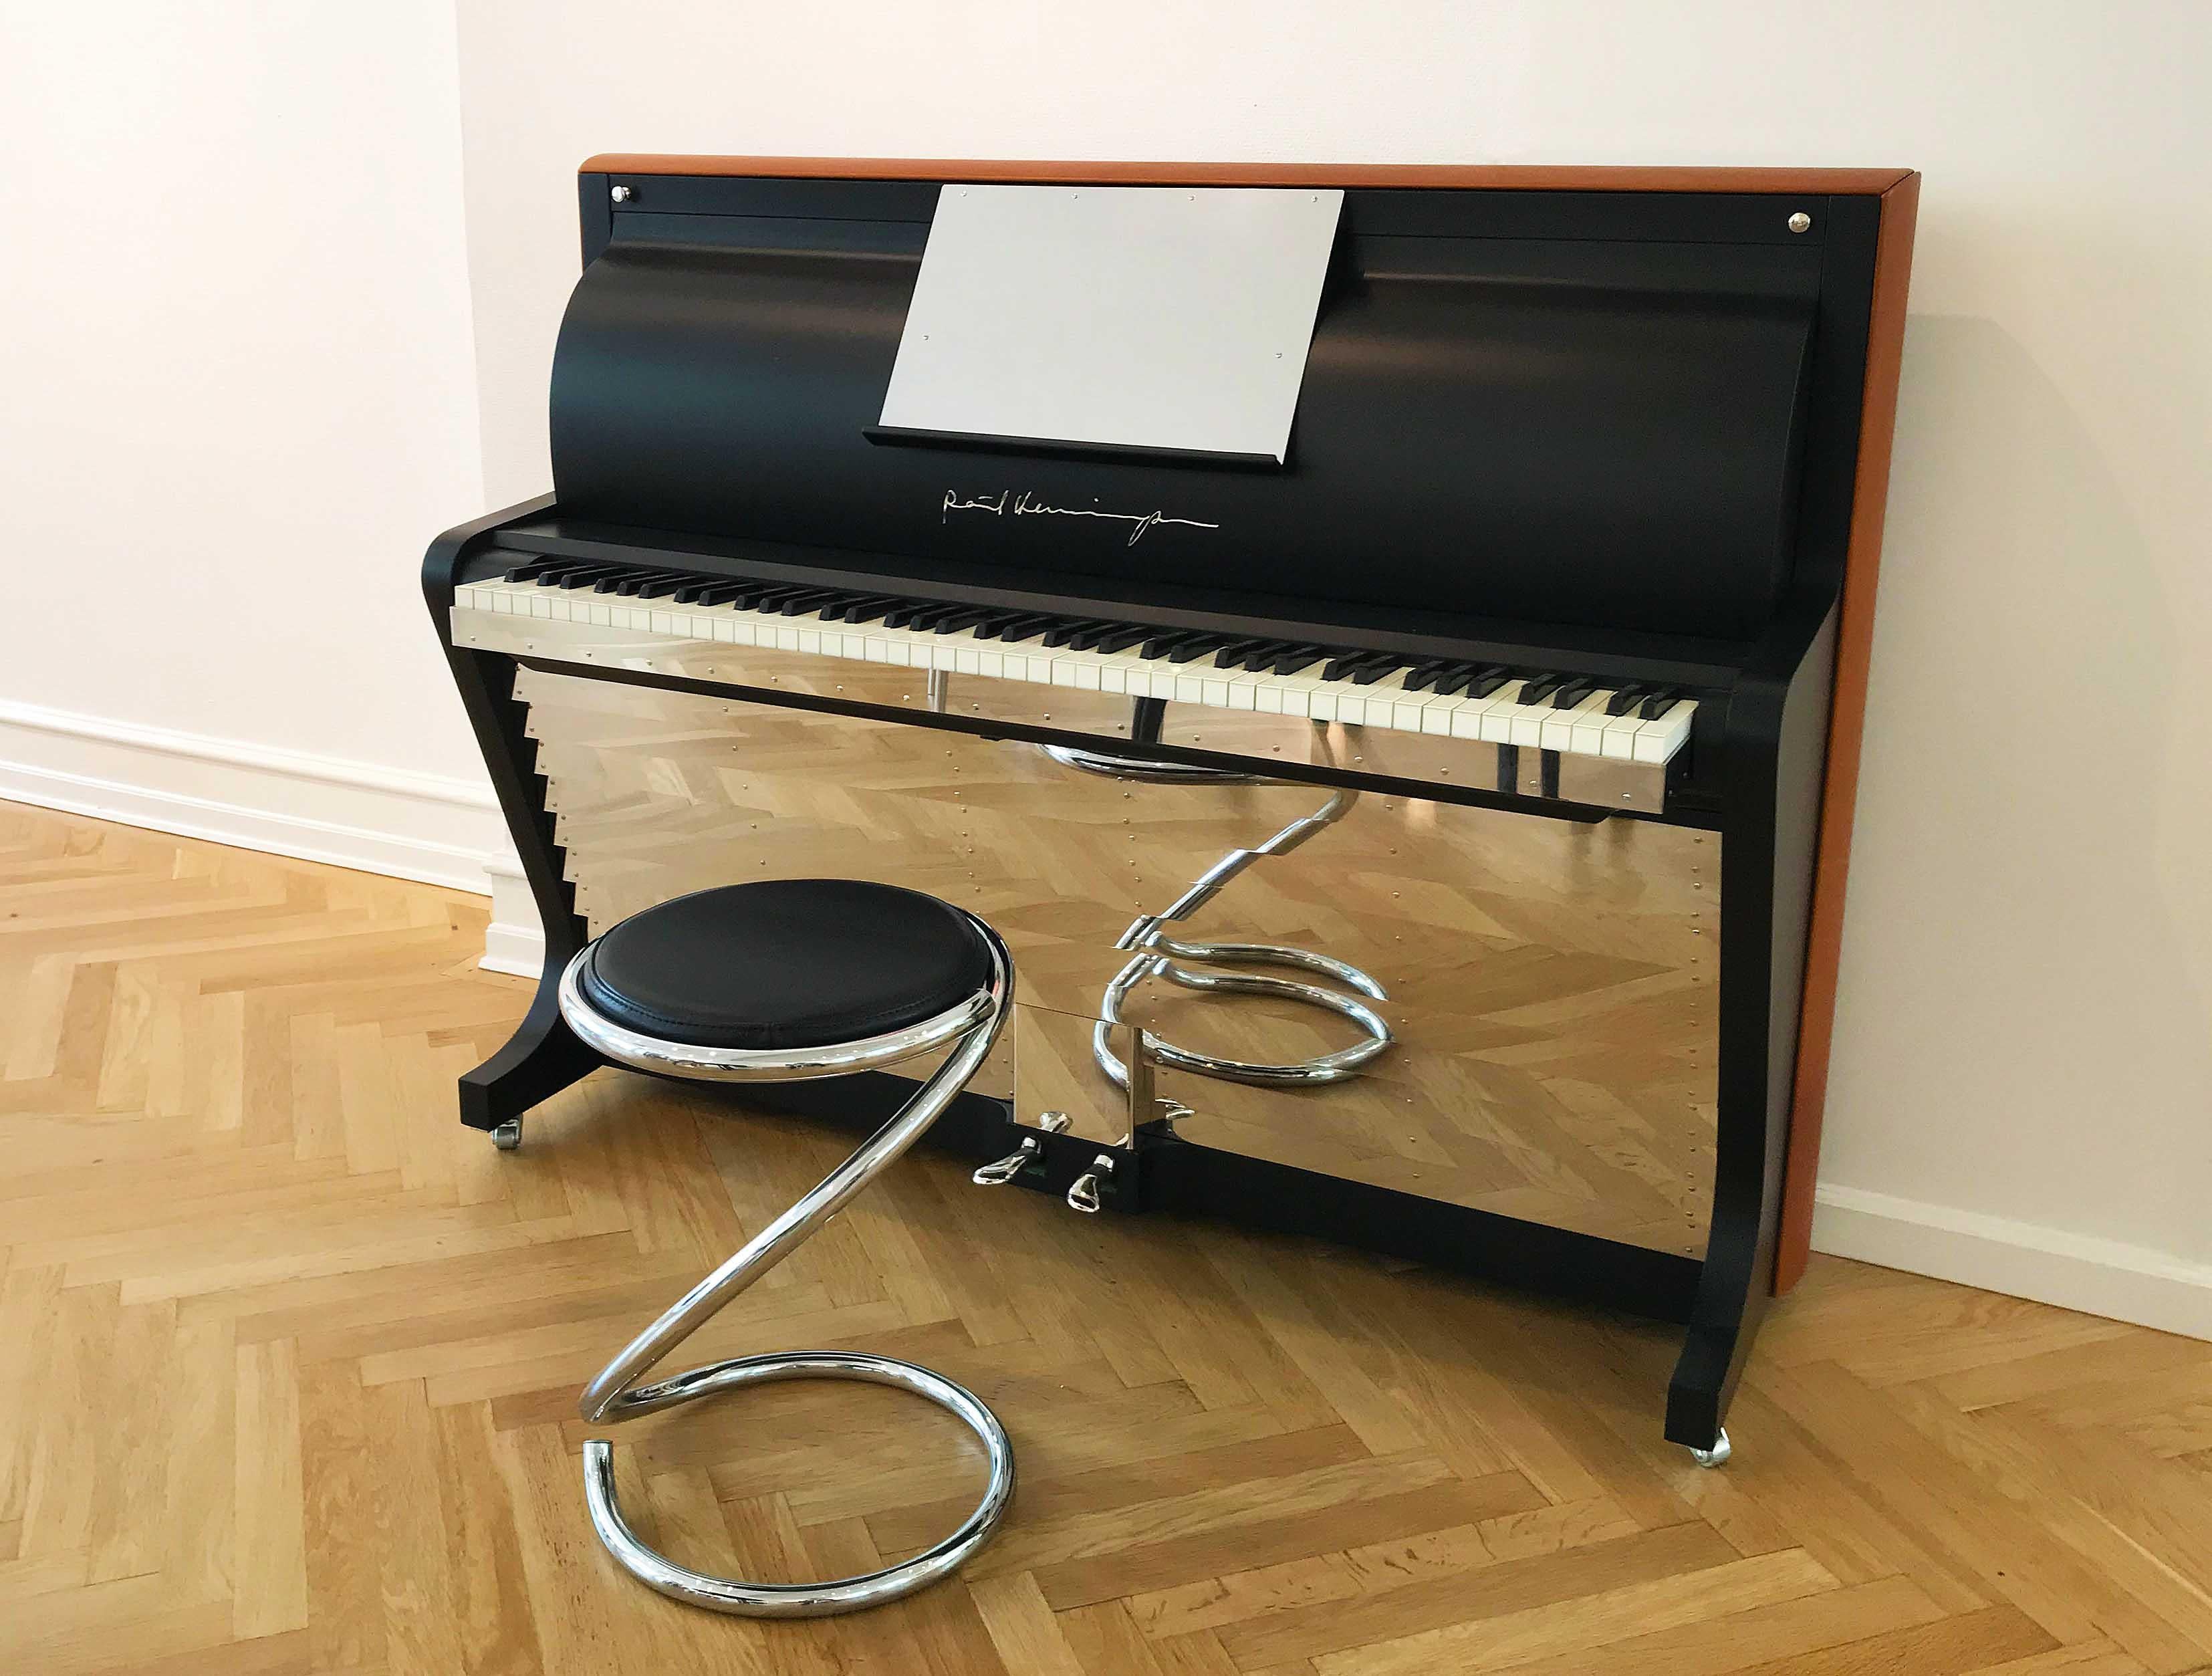 - All prices are listed ex works.
- 5 year guarantee.
- We regularly crate, ship and install PH Pianos worldwide with full insurance.

For those who want a traditional acoustic upright piano with one of the most iconic design silhouettes, the PH